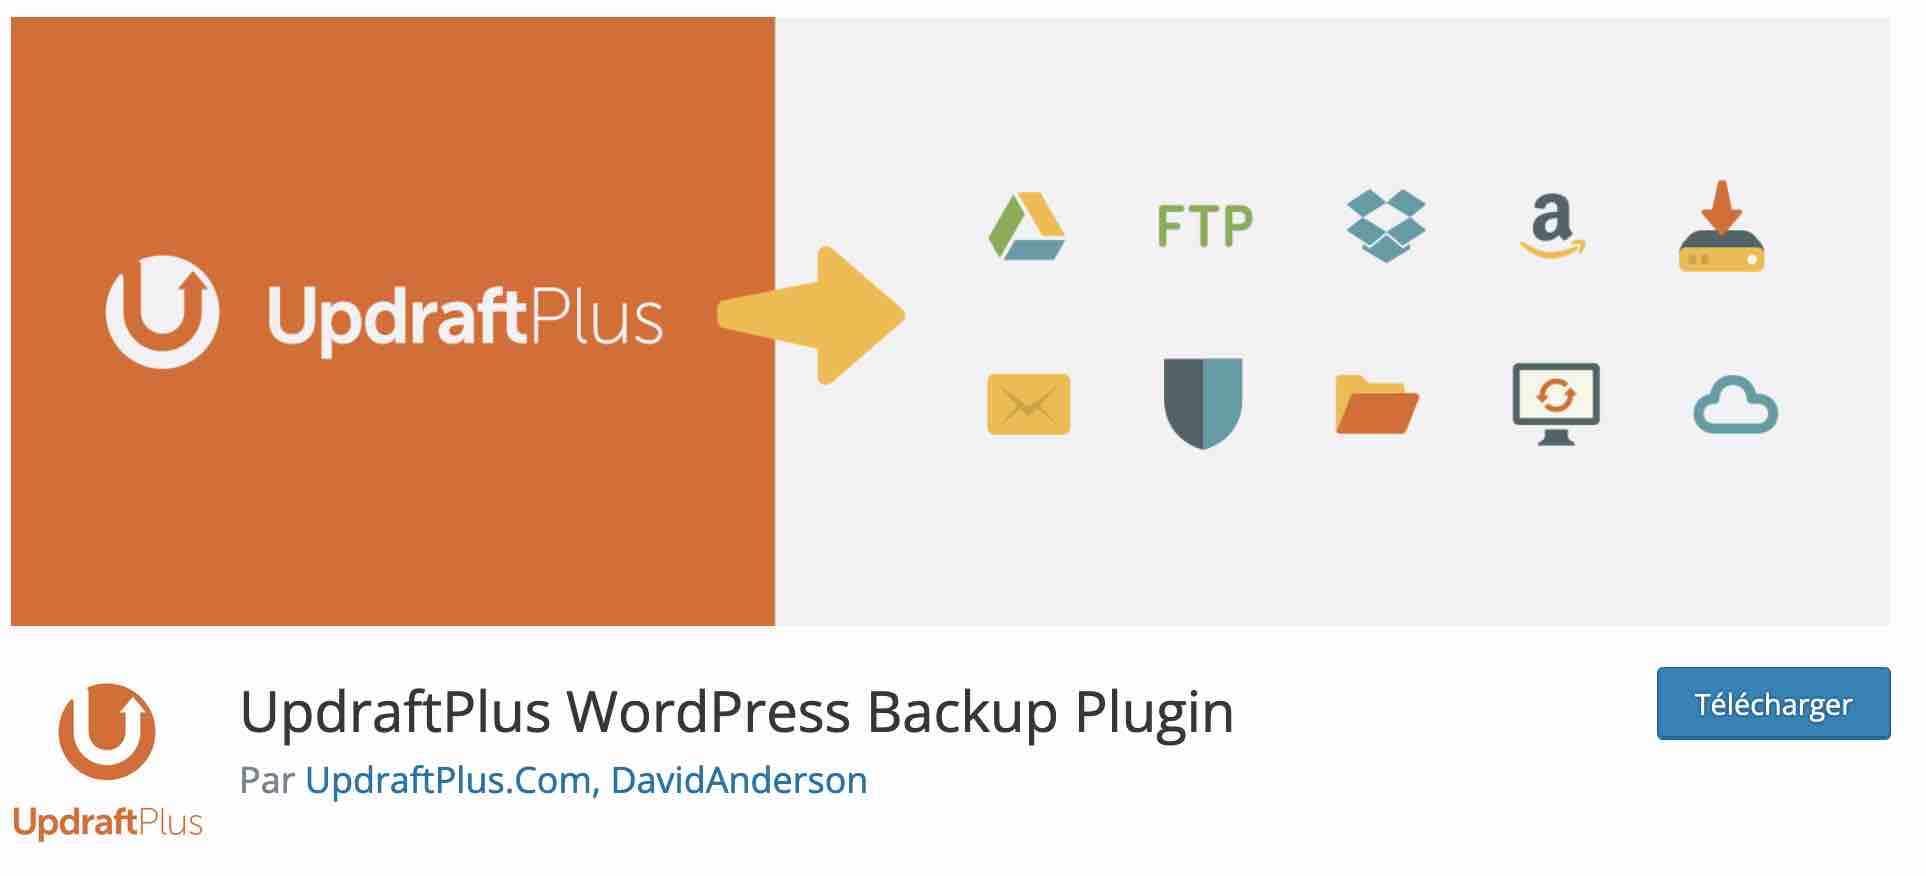 The UpdraftPlus backup extension.